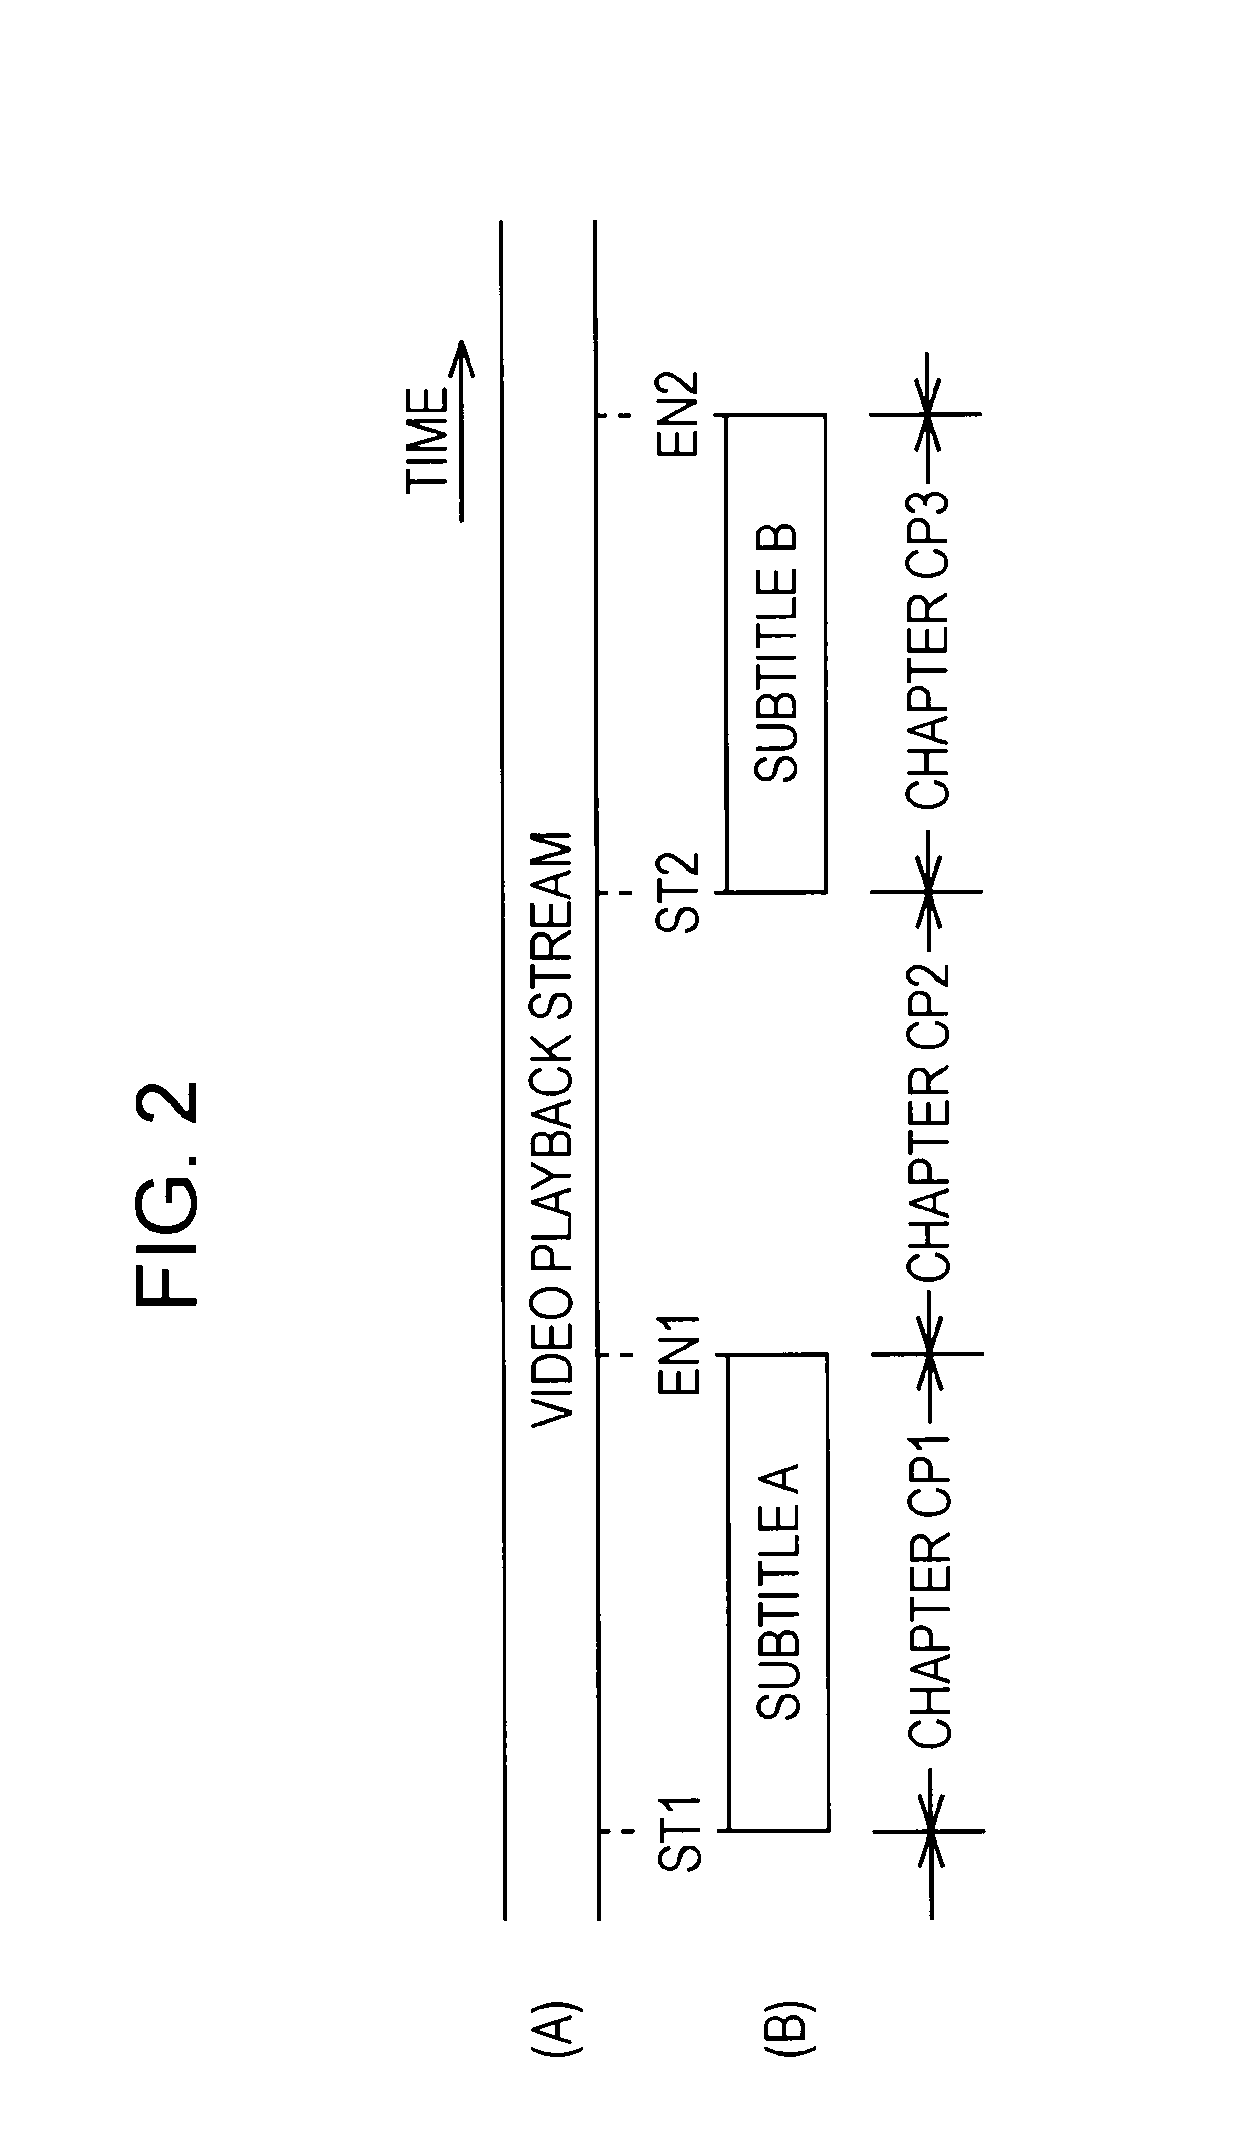 Playback apparatus and method